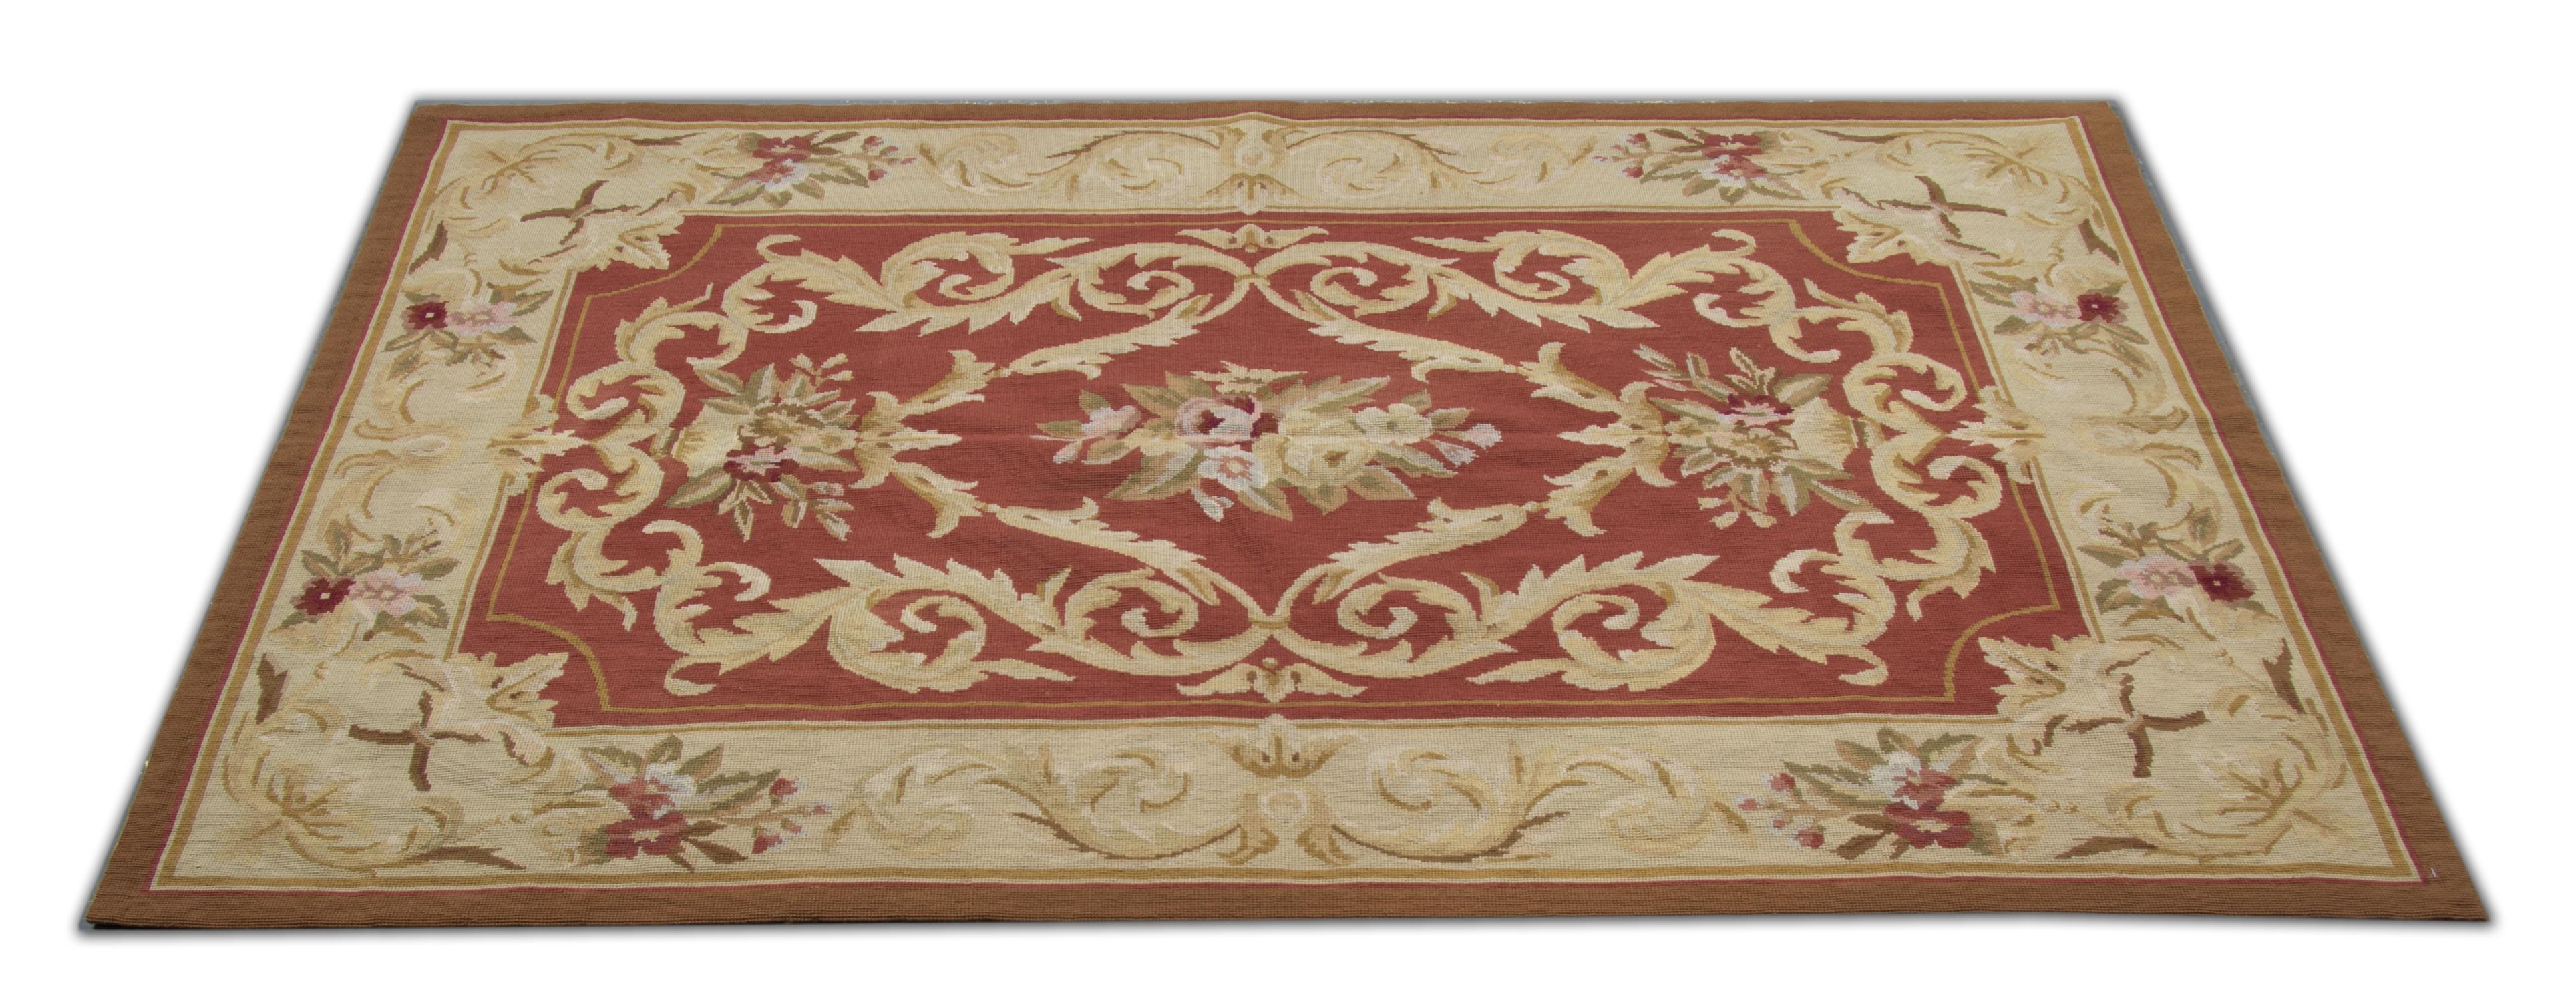 Chinese Traditional Aubusson Style Rug Area Carpet Handwoven Wool Needlepoint For Sale